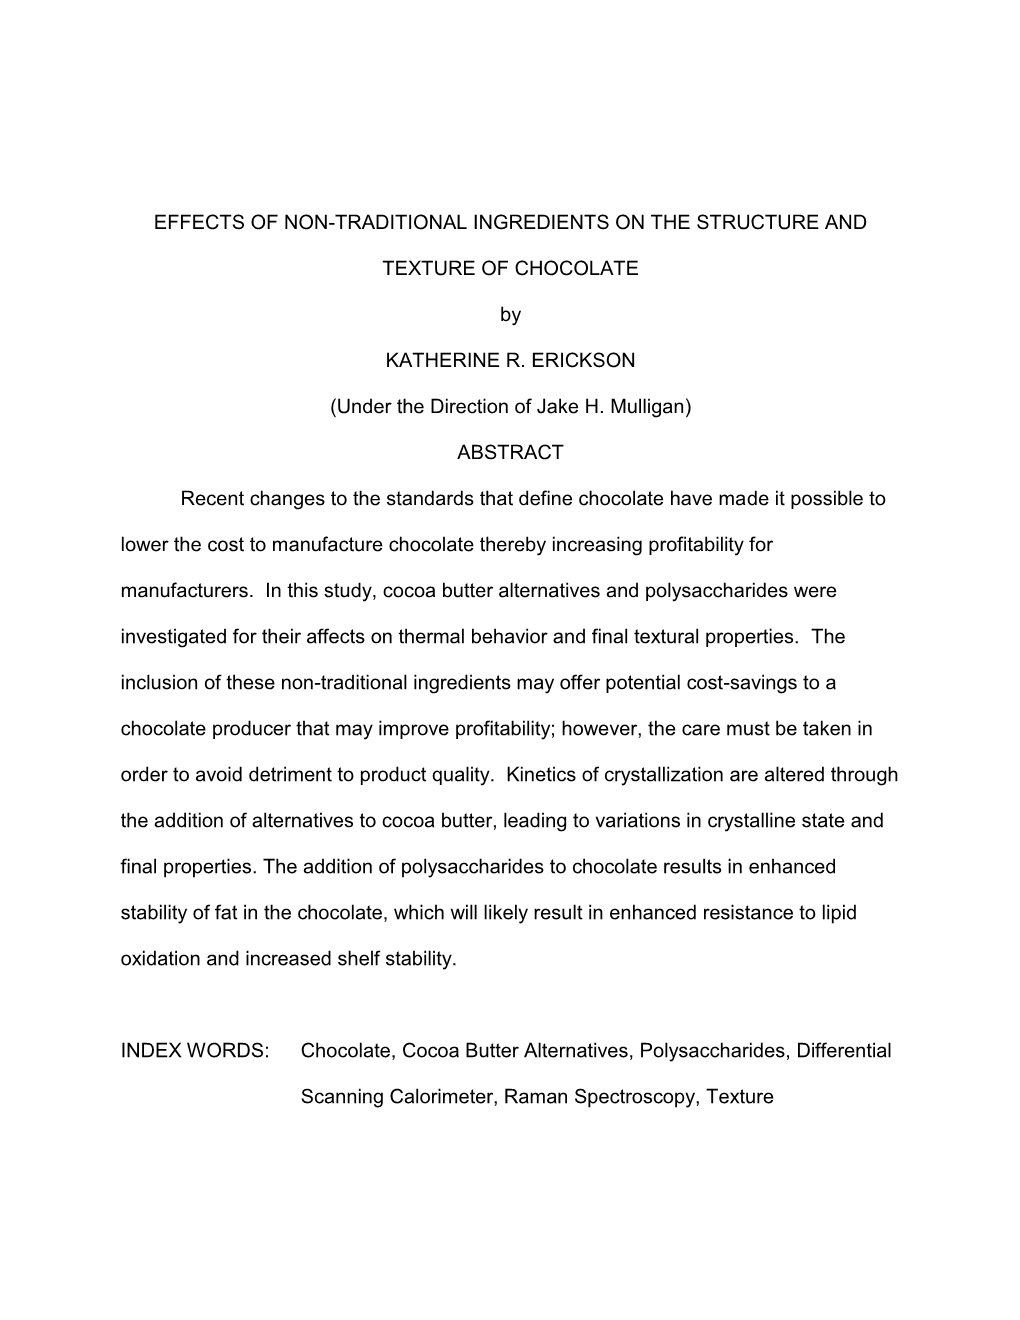 Effects of Non-Traditional Ingredients on the Structure And